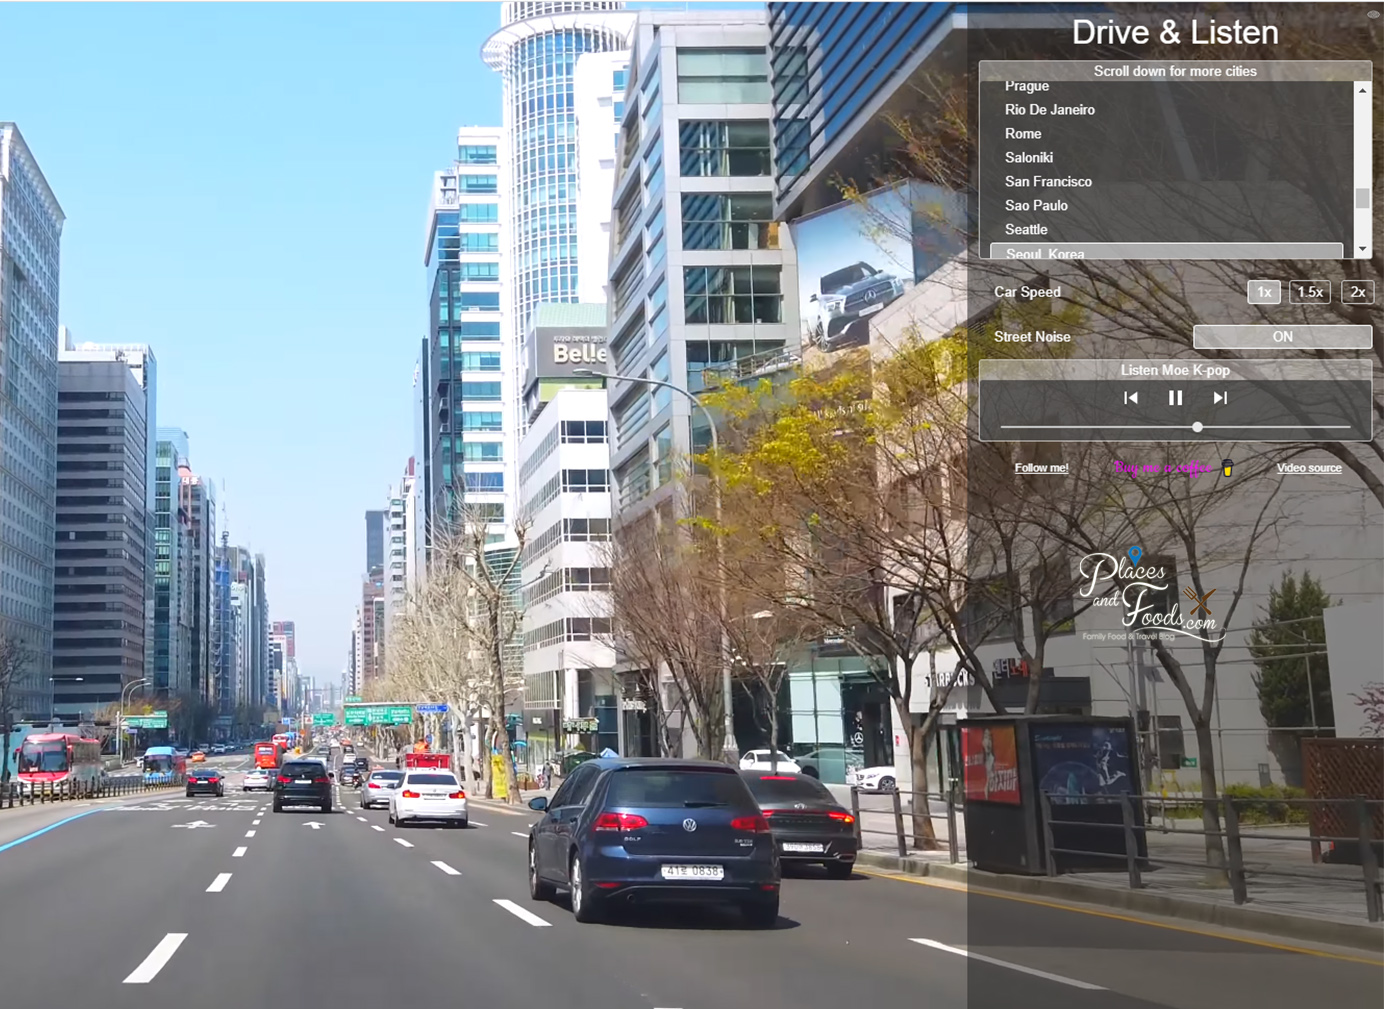 Travel virtually though cities worldwide with the 'Drive & Listen